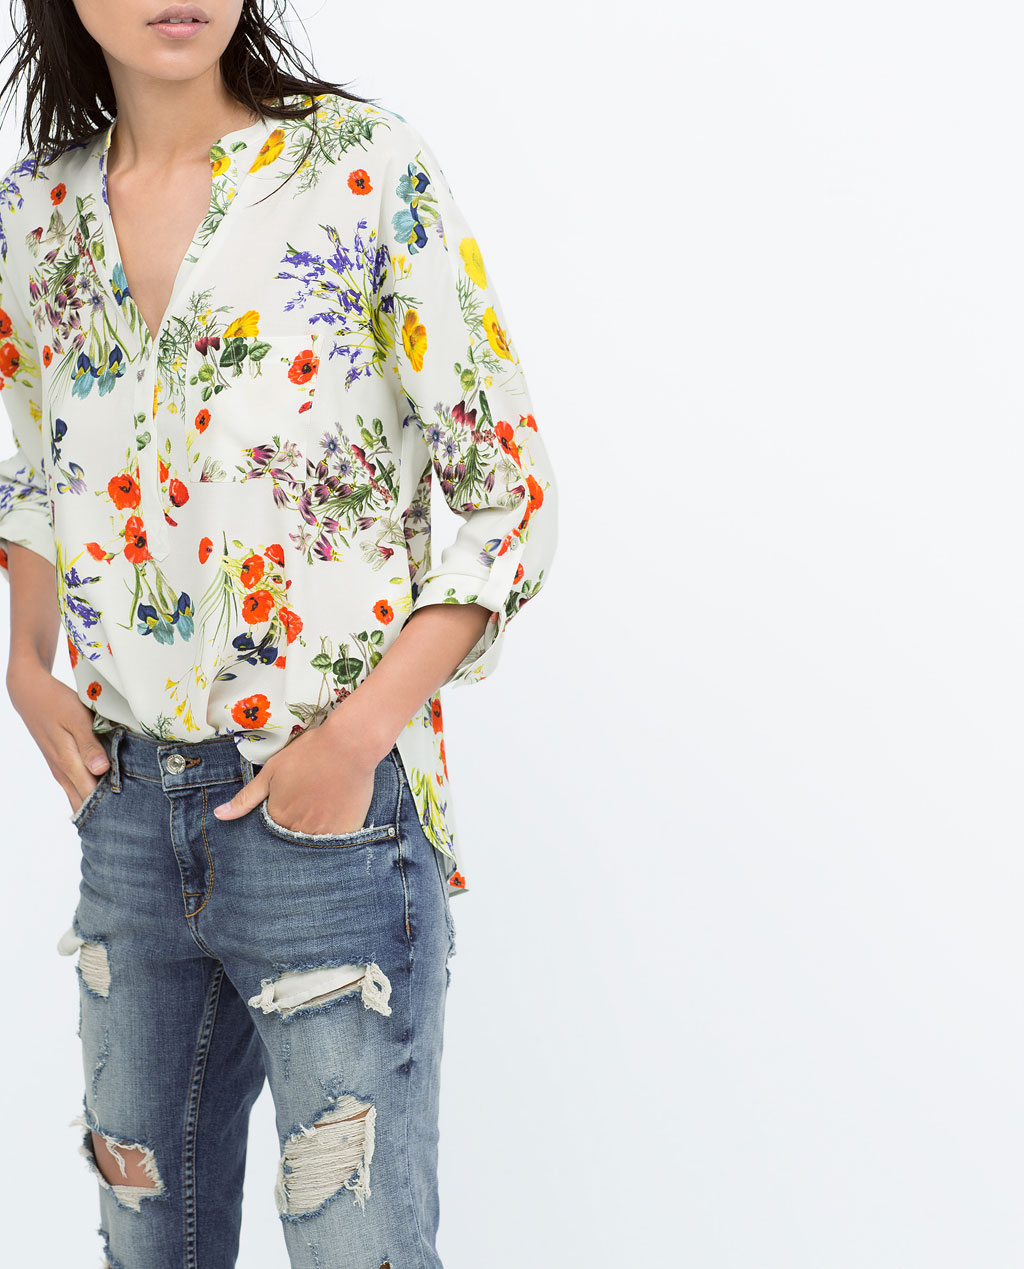 Style Crush - spring tops